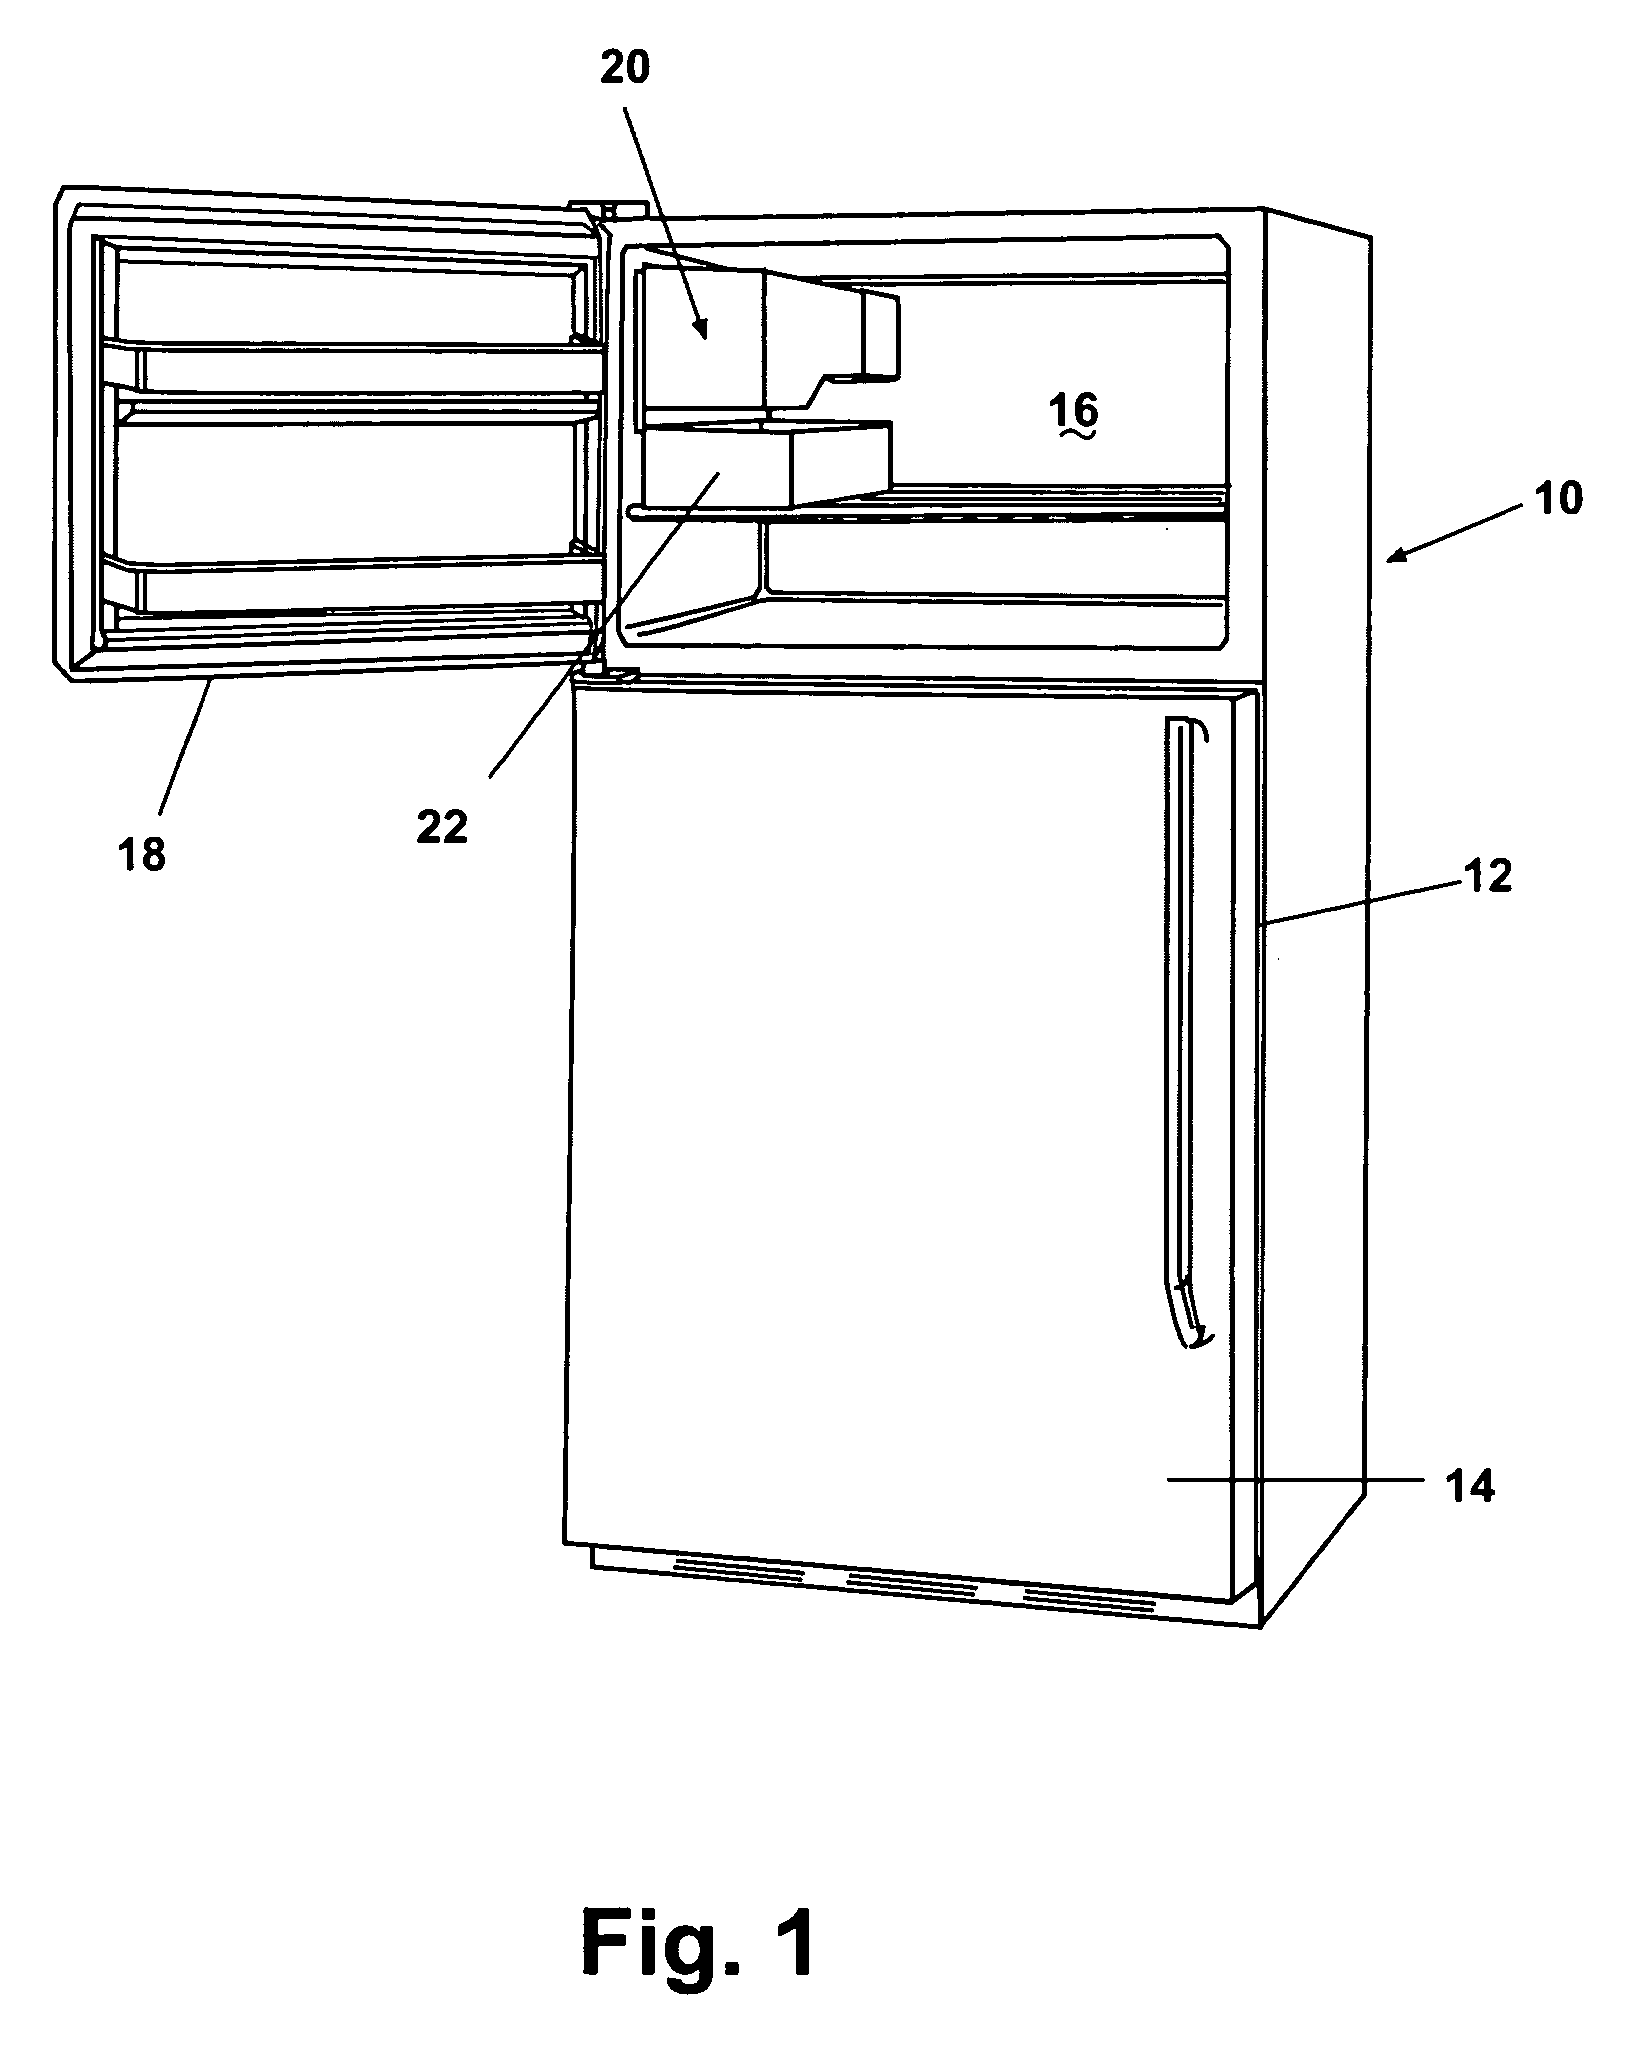 Refrigerator with compact icemaker